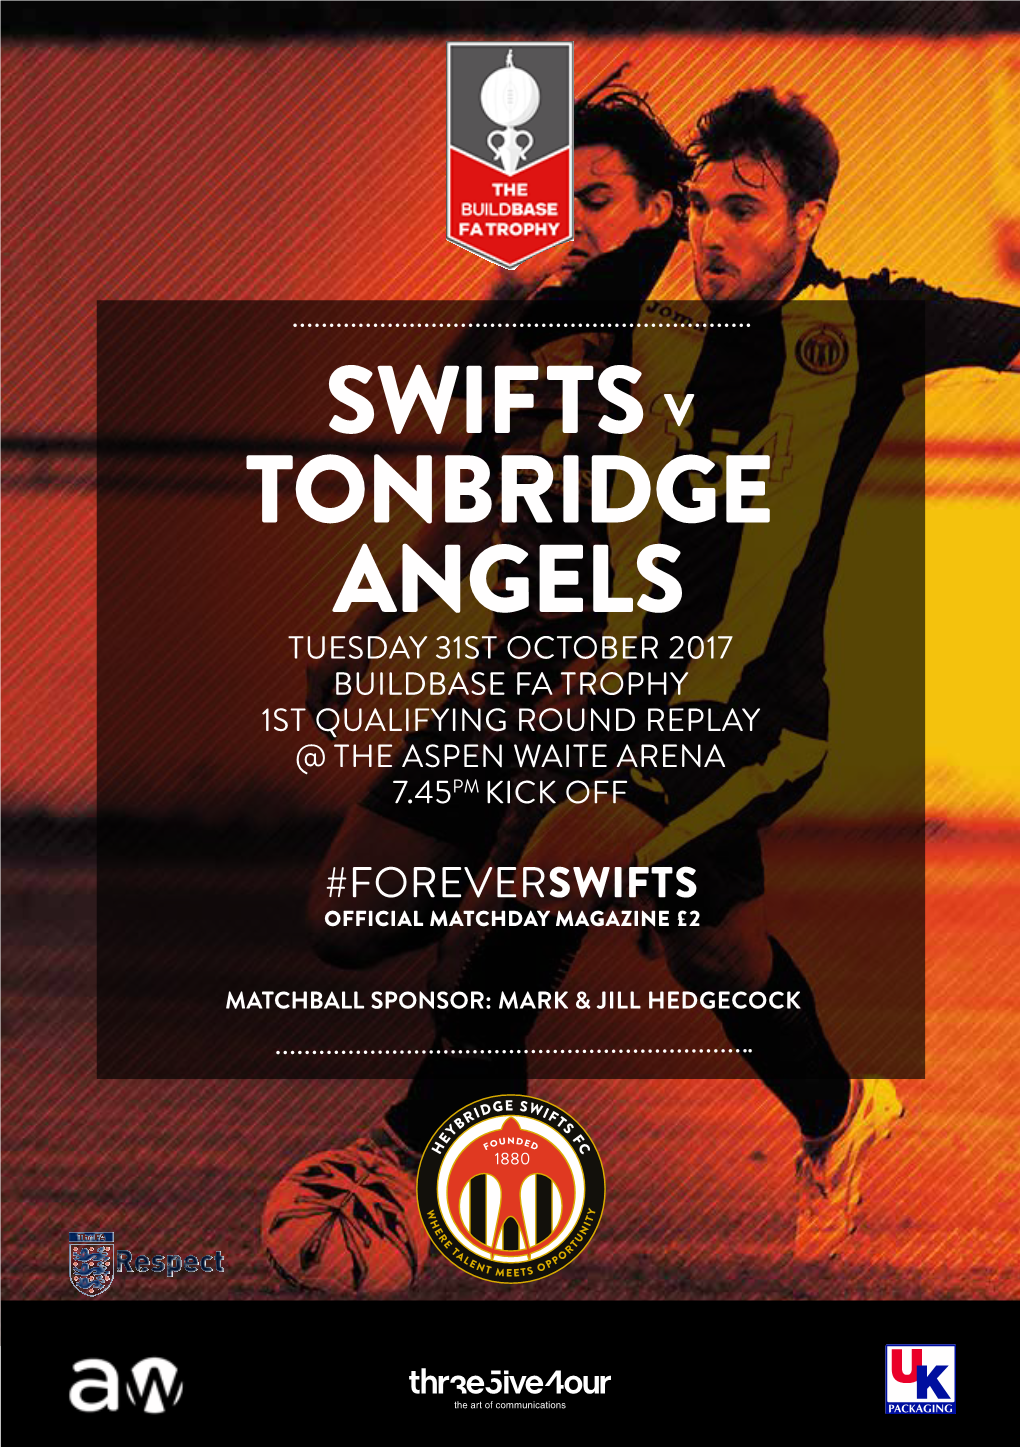 Swifts V Tonbridge Angels Tuesday 31St October 2017 Buildbase Fa Trophy 1St Qualifying Round Replay @ the Aspen Waite Arena 7.45Pm Kick Off